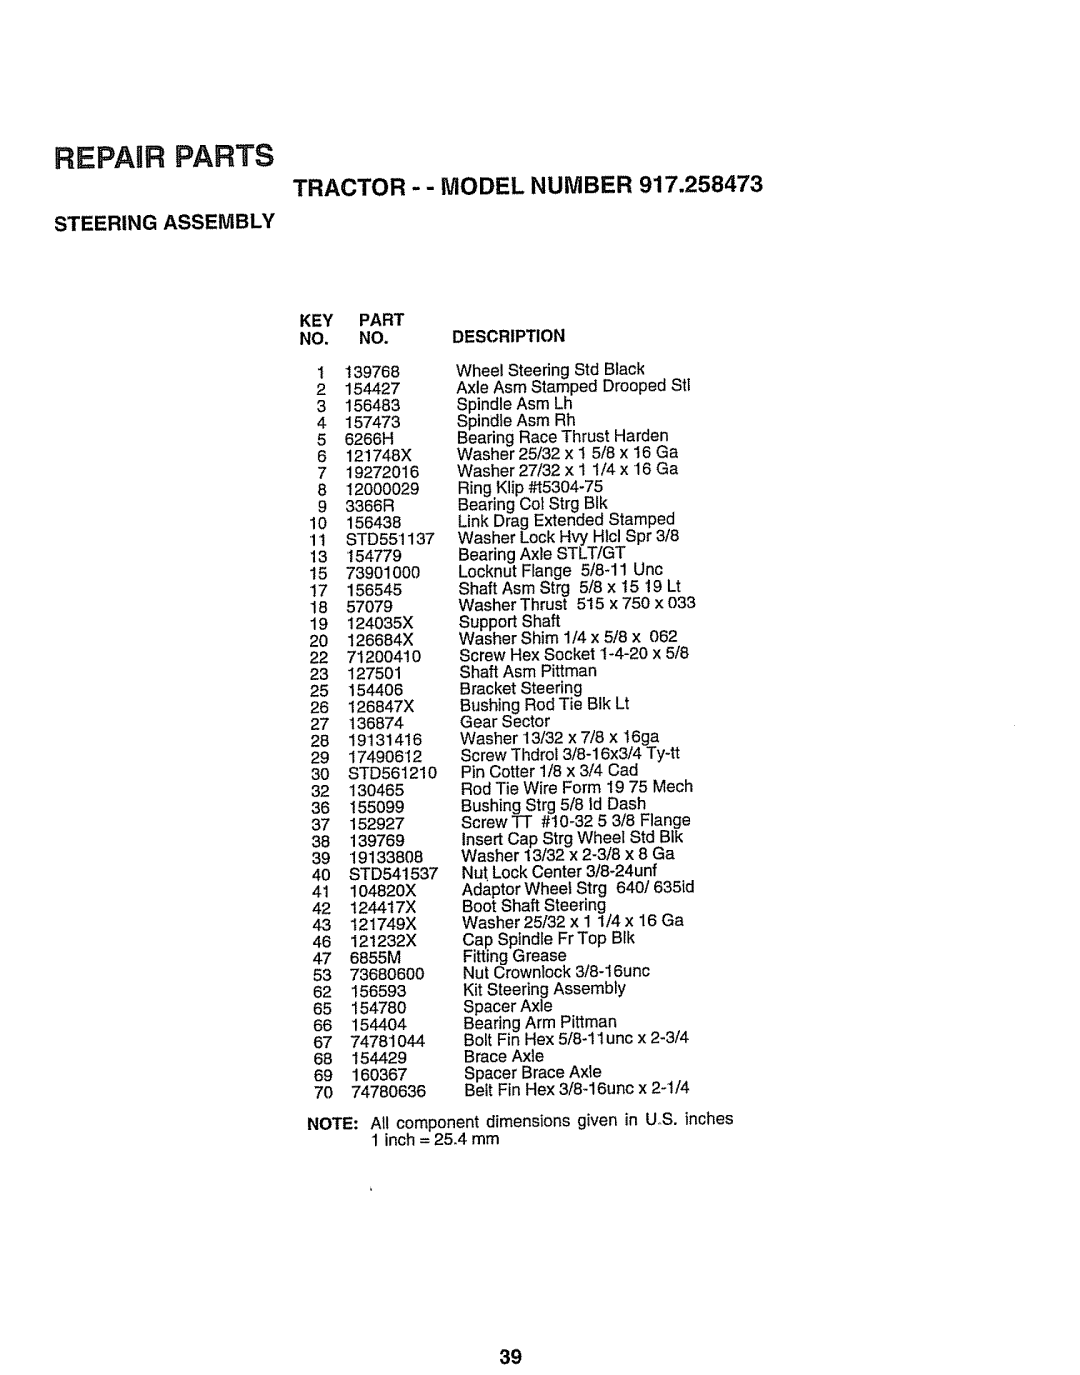 Sears 917.258473 owner manual Repair Parts, Tractor -- Model Number, Steering Assembly 